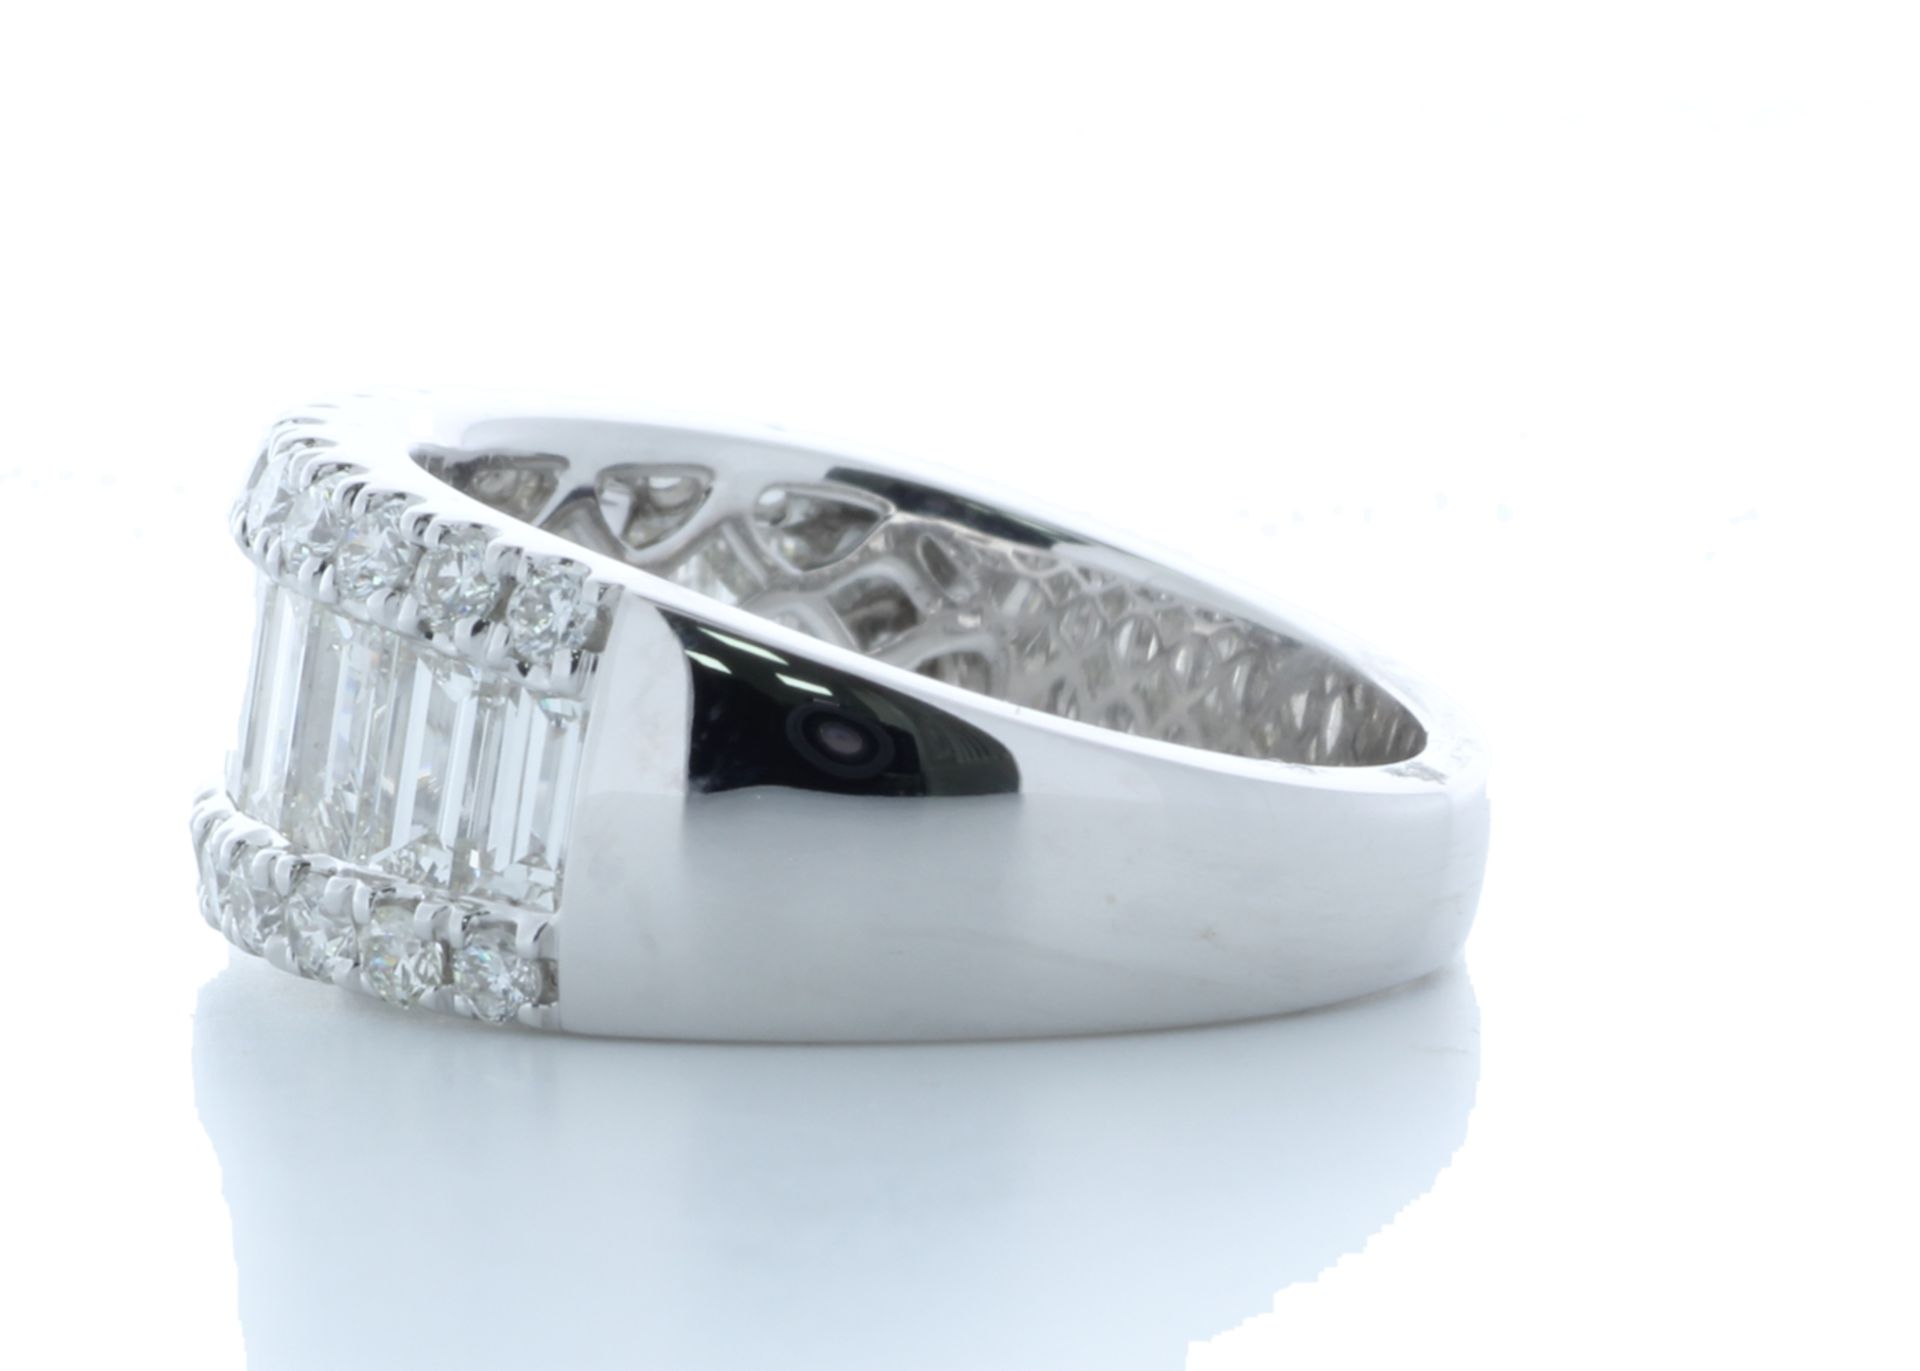 18ct White Gold Channel Set Semi Eternity Diamond Ring 2.34 Carats - Valued by AGI £17,600.00 - - Image 2 of 4